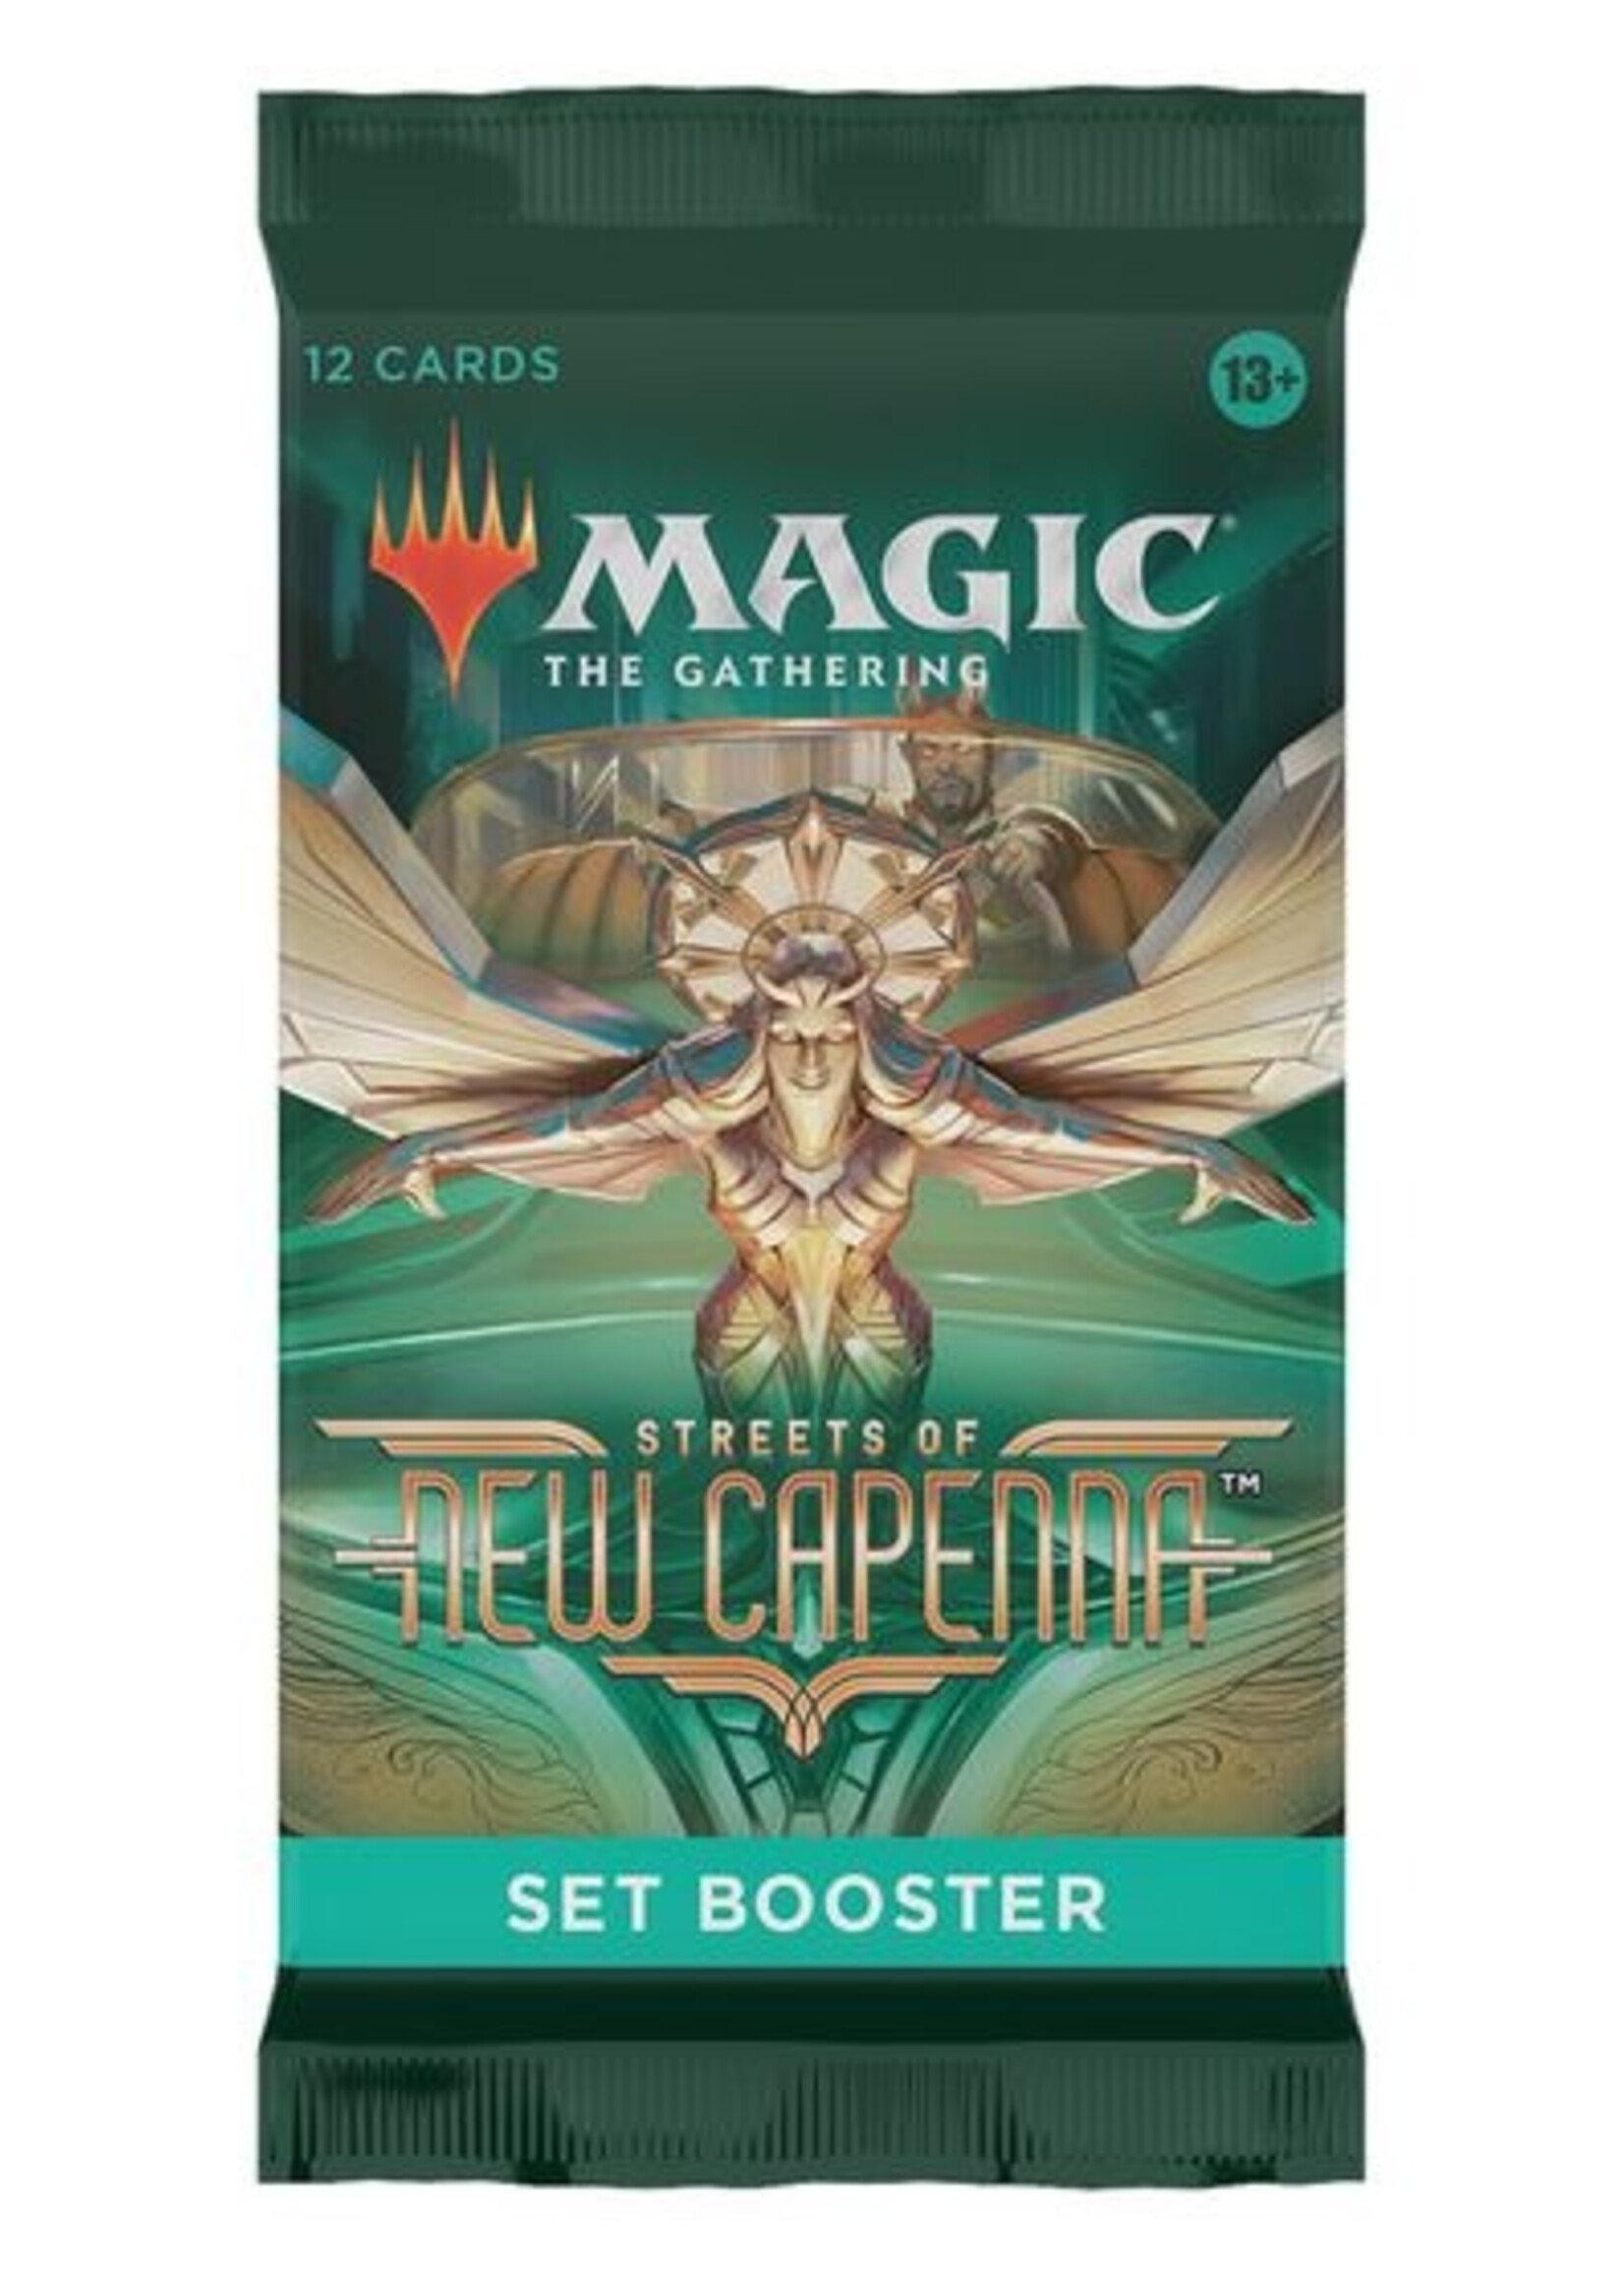 Wizards of the Coast - "Streets of New Capenna" Set Booster